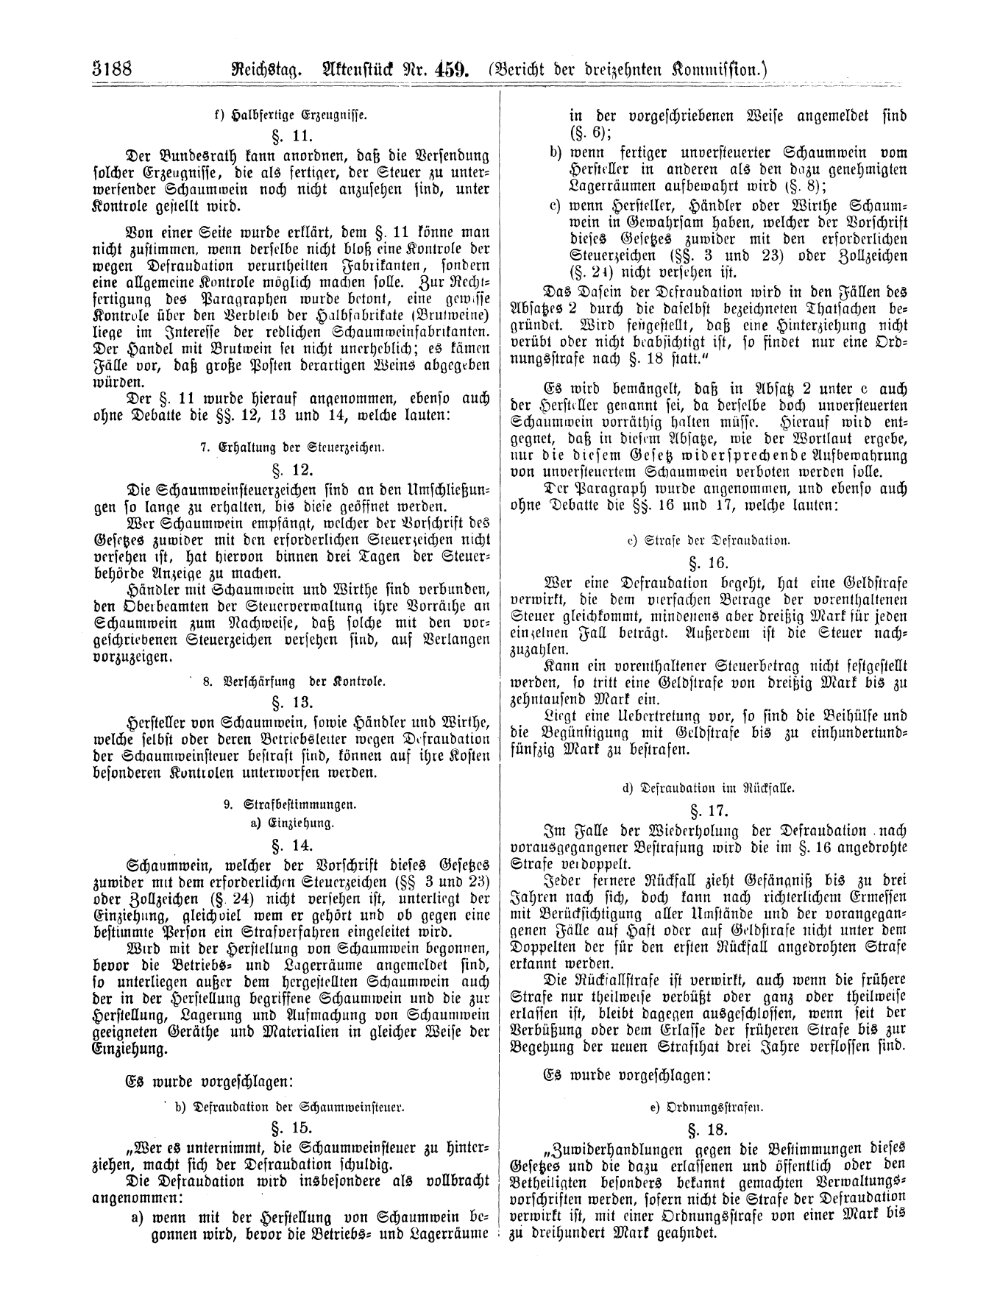 Scan of page 3188